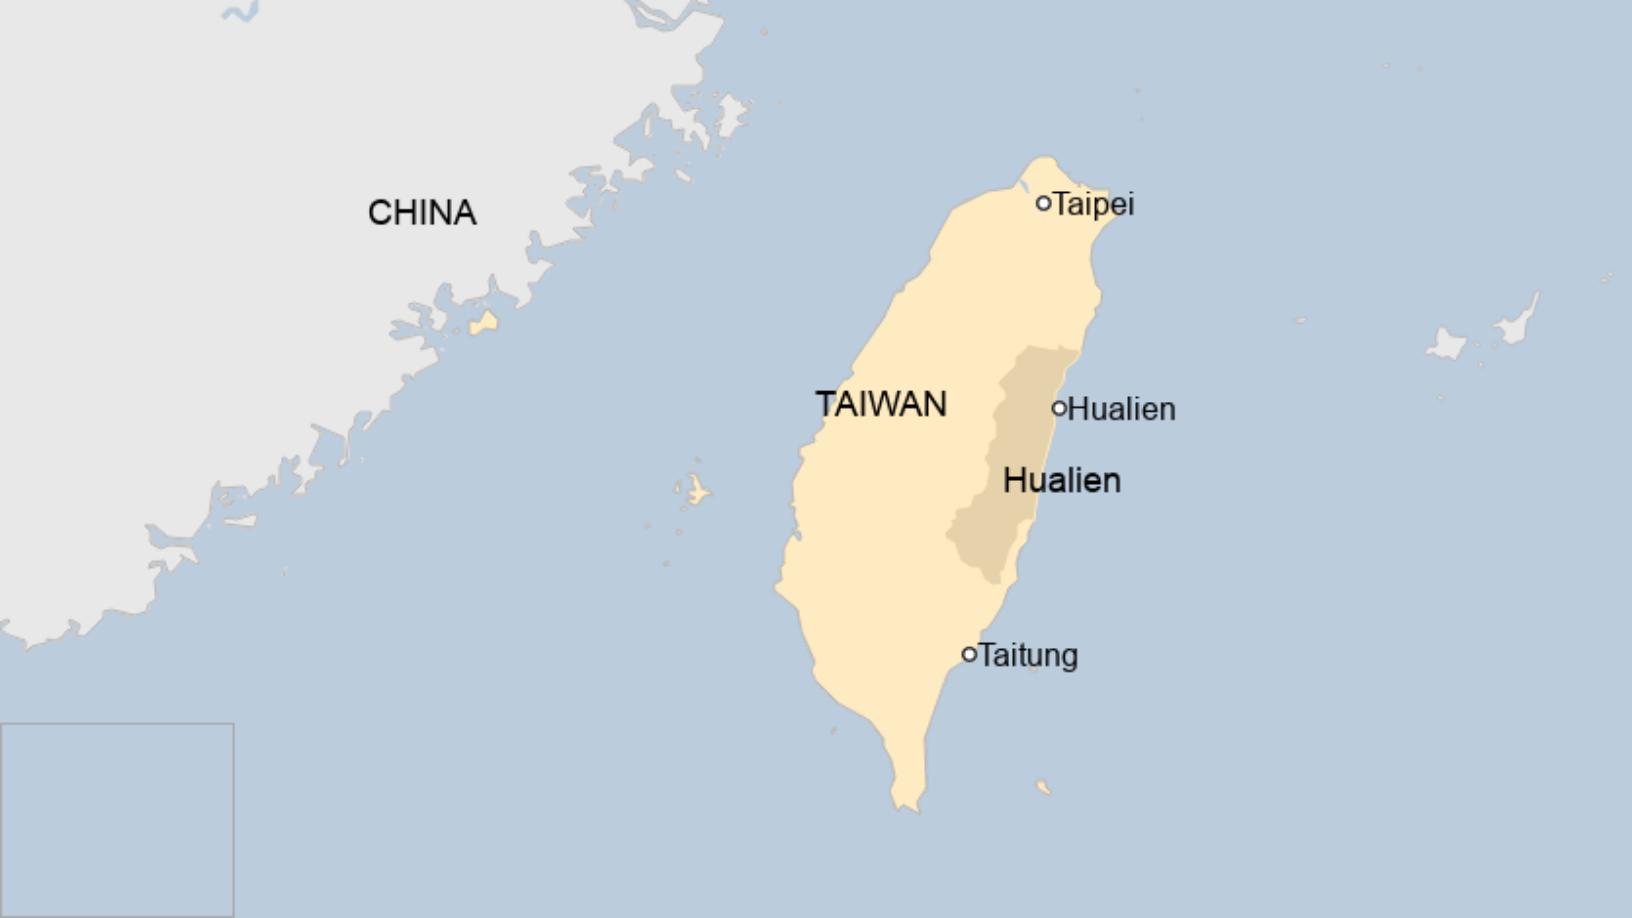 Taiwan Map Worldnews non political-News site without politics-Freedom from politics-news without political bias-news not about the election-non political news site-News other than politics-Nonpolitical-News-news source without politics-News other than mainstream-Alternative news without politics-Least biased news